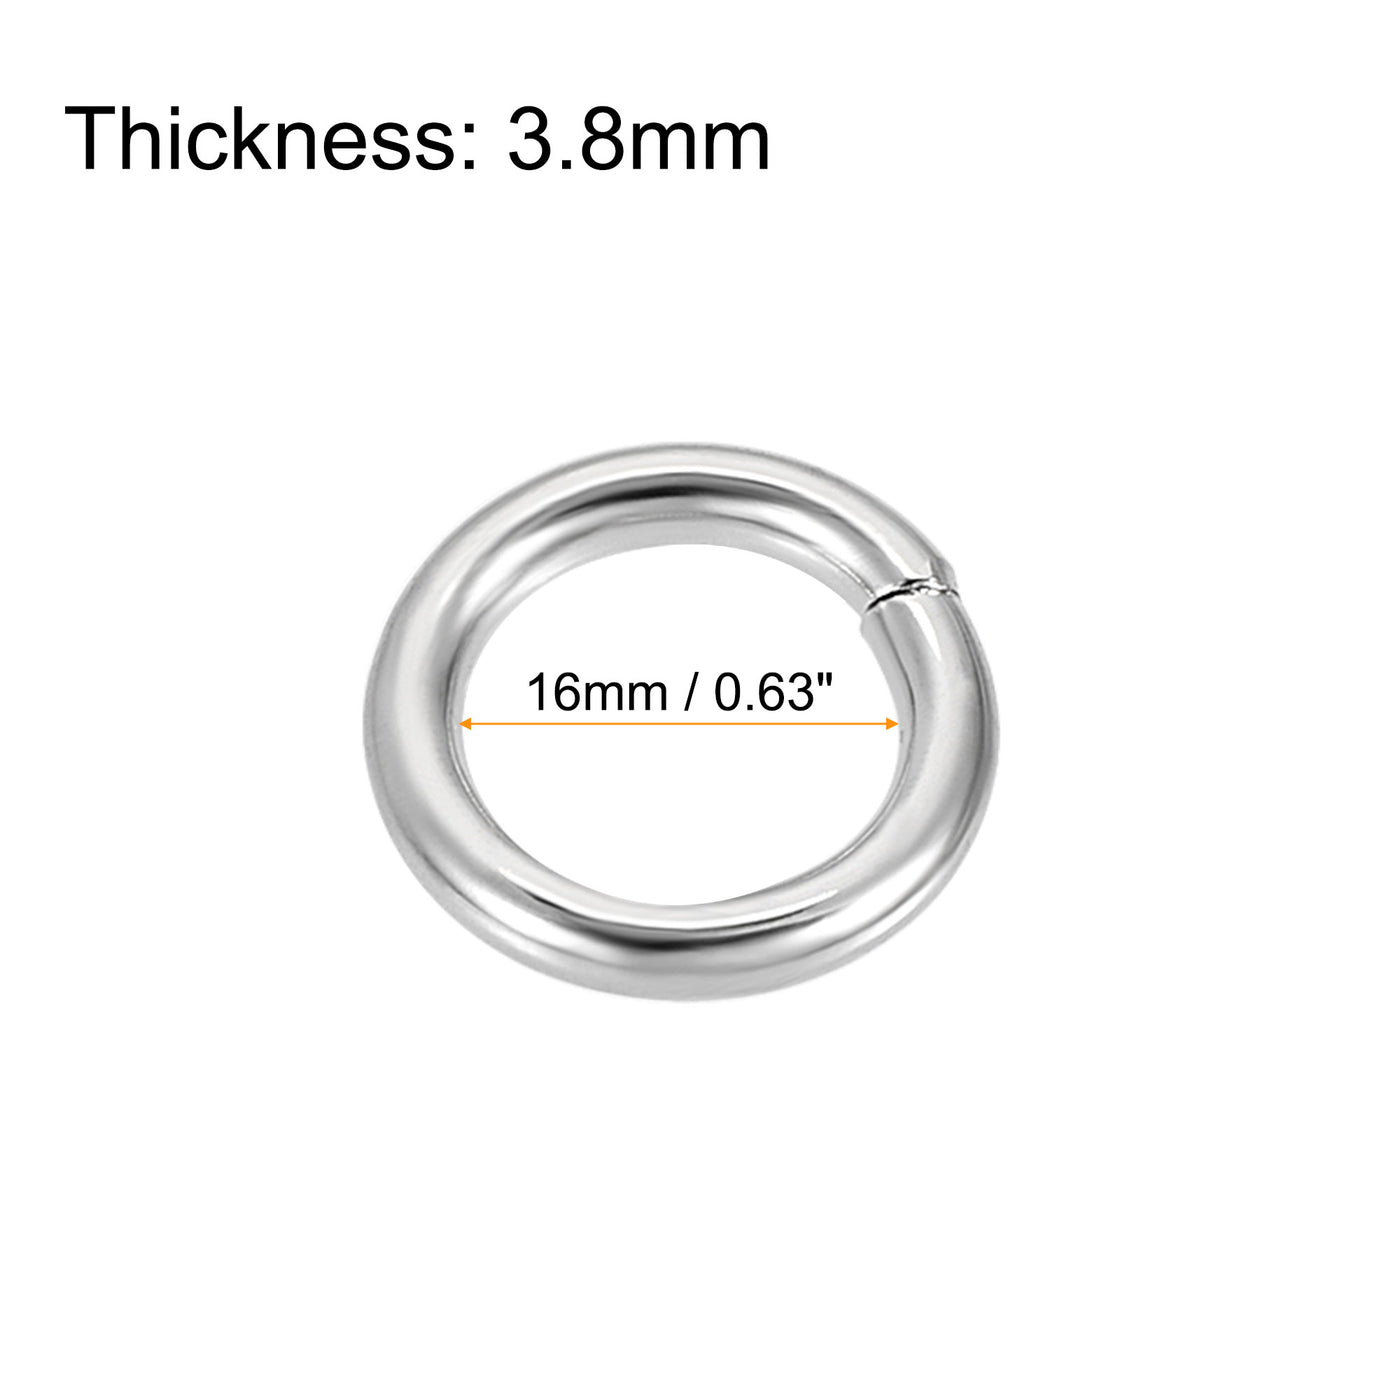 uxcell Uxcell Metal O Ring 16mm(0.63") ID 3.8mm Thickness Non-Welded Rings Silver Tone 15pcs